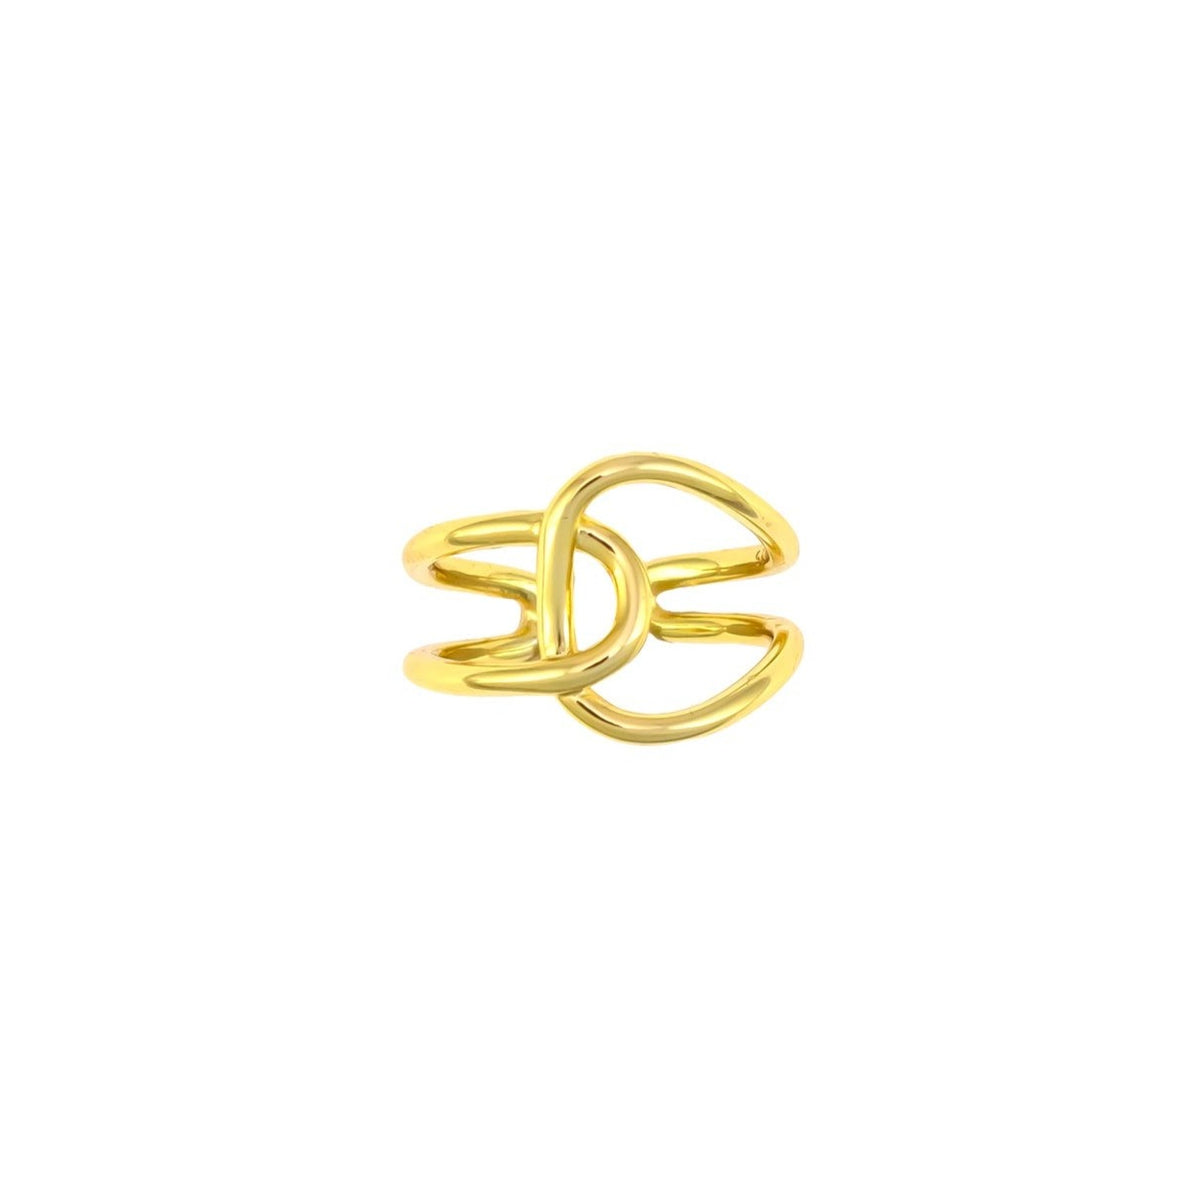 Dauplaise Jewelry - Lucy Adjustable Gold Ring